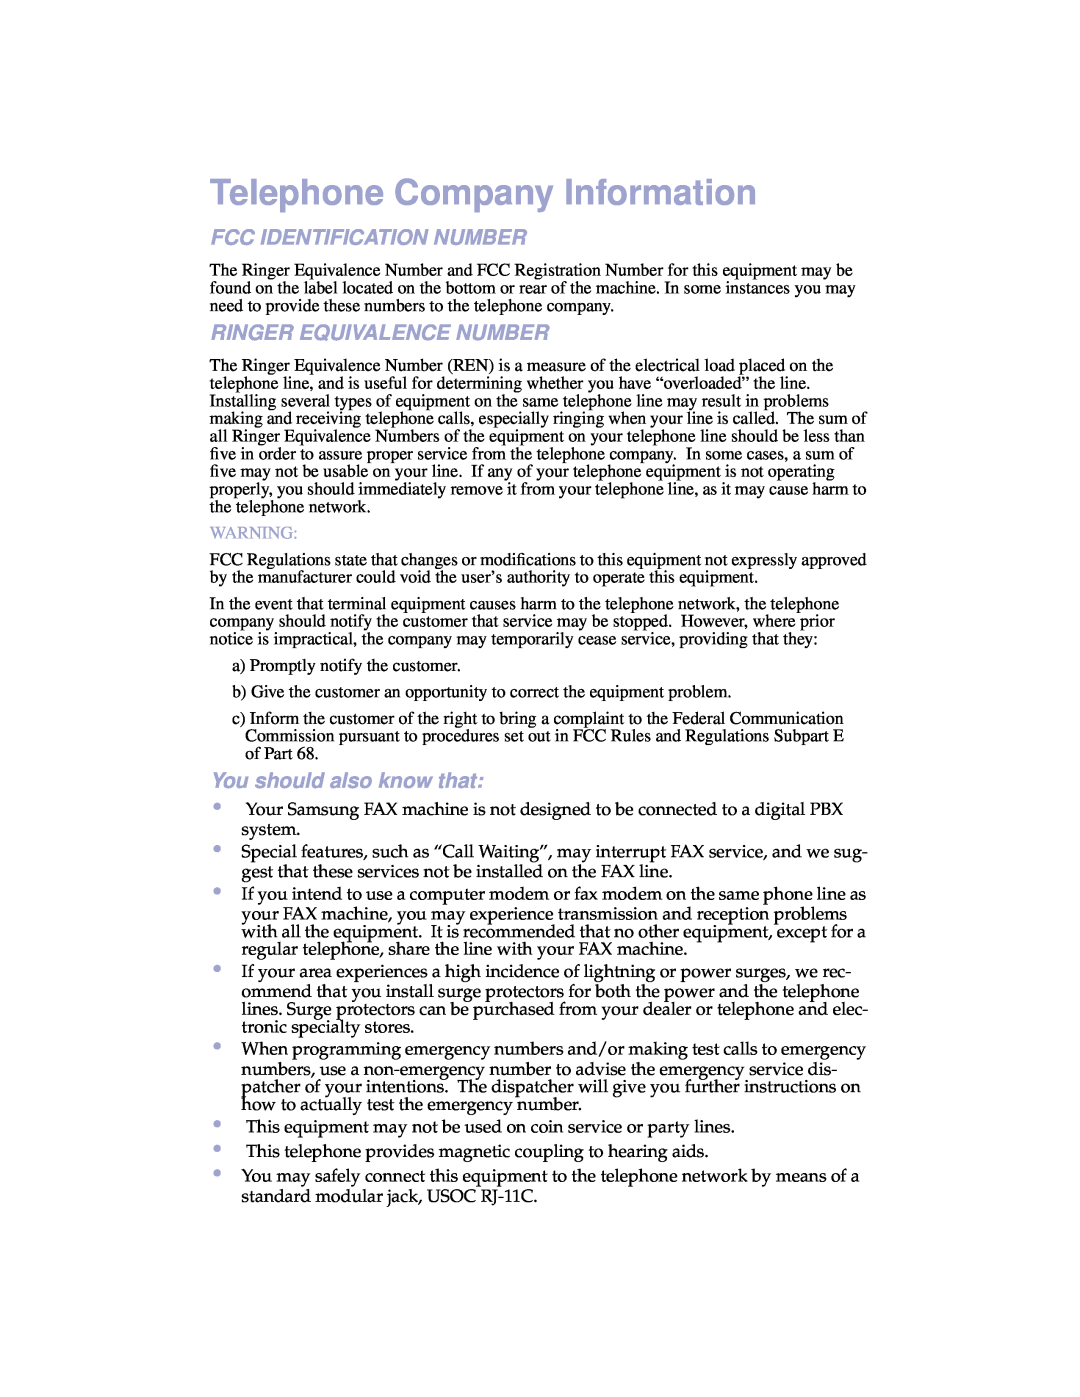 Samsung SF-3100 manual Telephone Company Information, Fcc Identification Number, Ringer Equivalence Number 